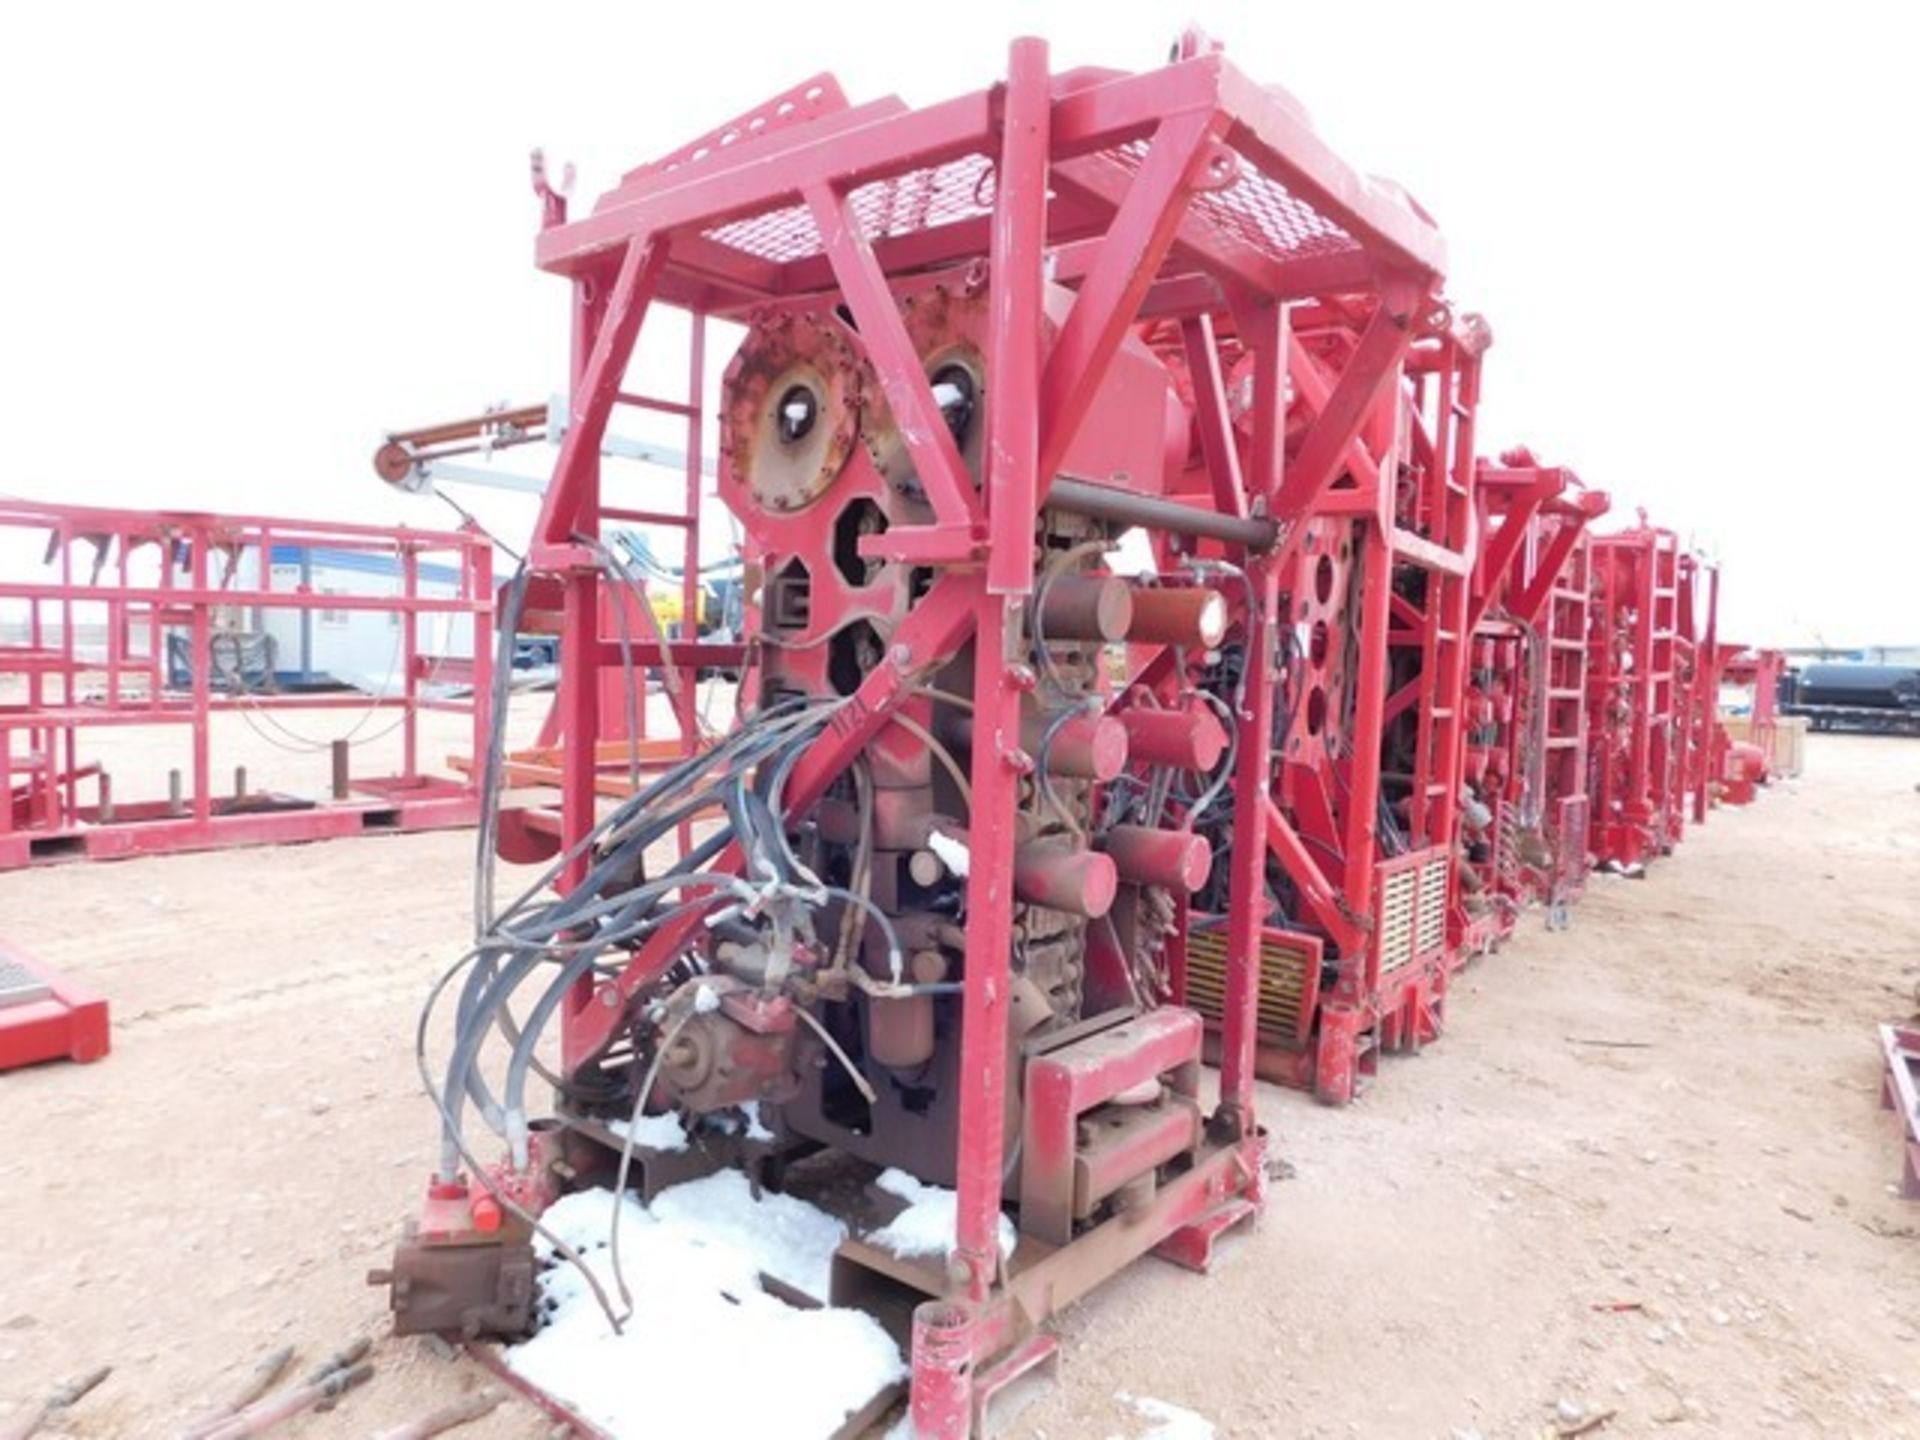 Located in YARD 1 - Midland, TX (1121) 2013 HYDRO RIG HR680 COILED TUBING INJECT - Image 2 of 2